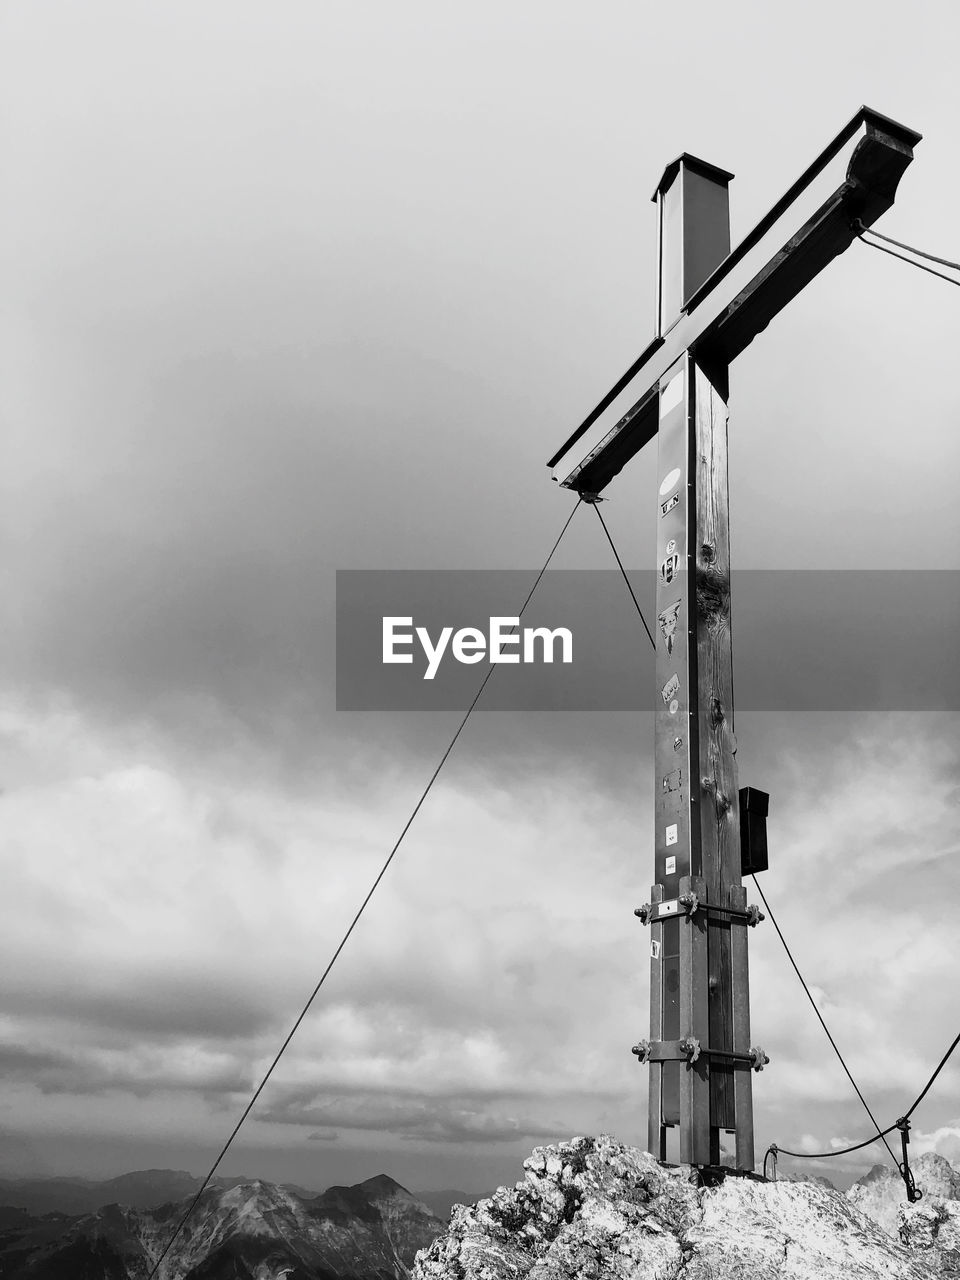 sky, black and white, nature, cloud, wind, monochrome photography, environment, no people, monochrome, landscape, technology, day, outdoors, mountain, beauty in nature, overcast, overhead power line, land, snow, electricity, power generation, architecture, rural scene, scenics - nature, cable, low angle view